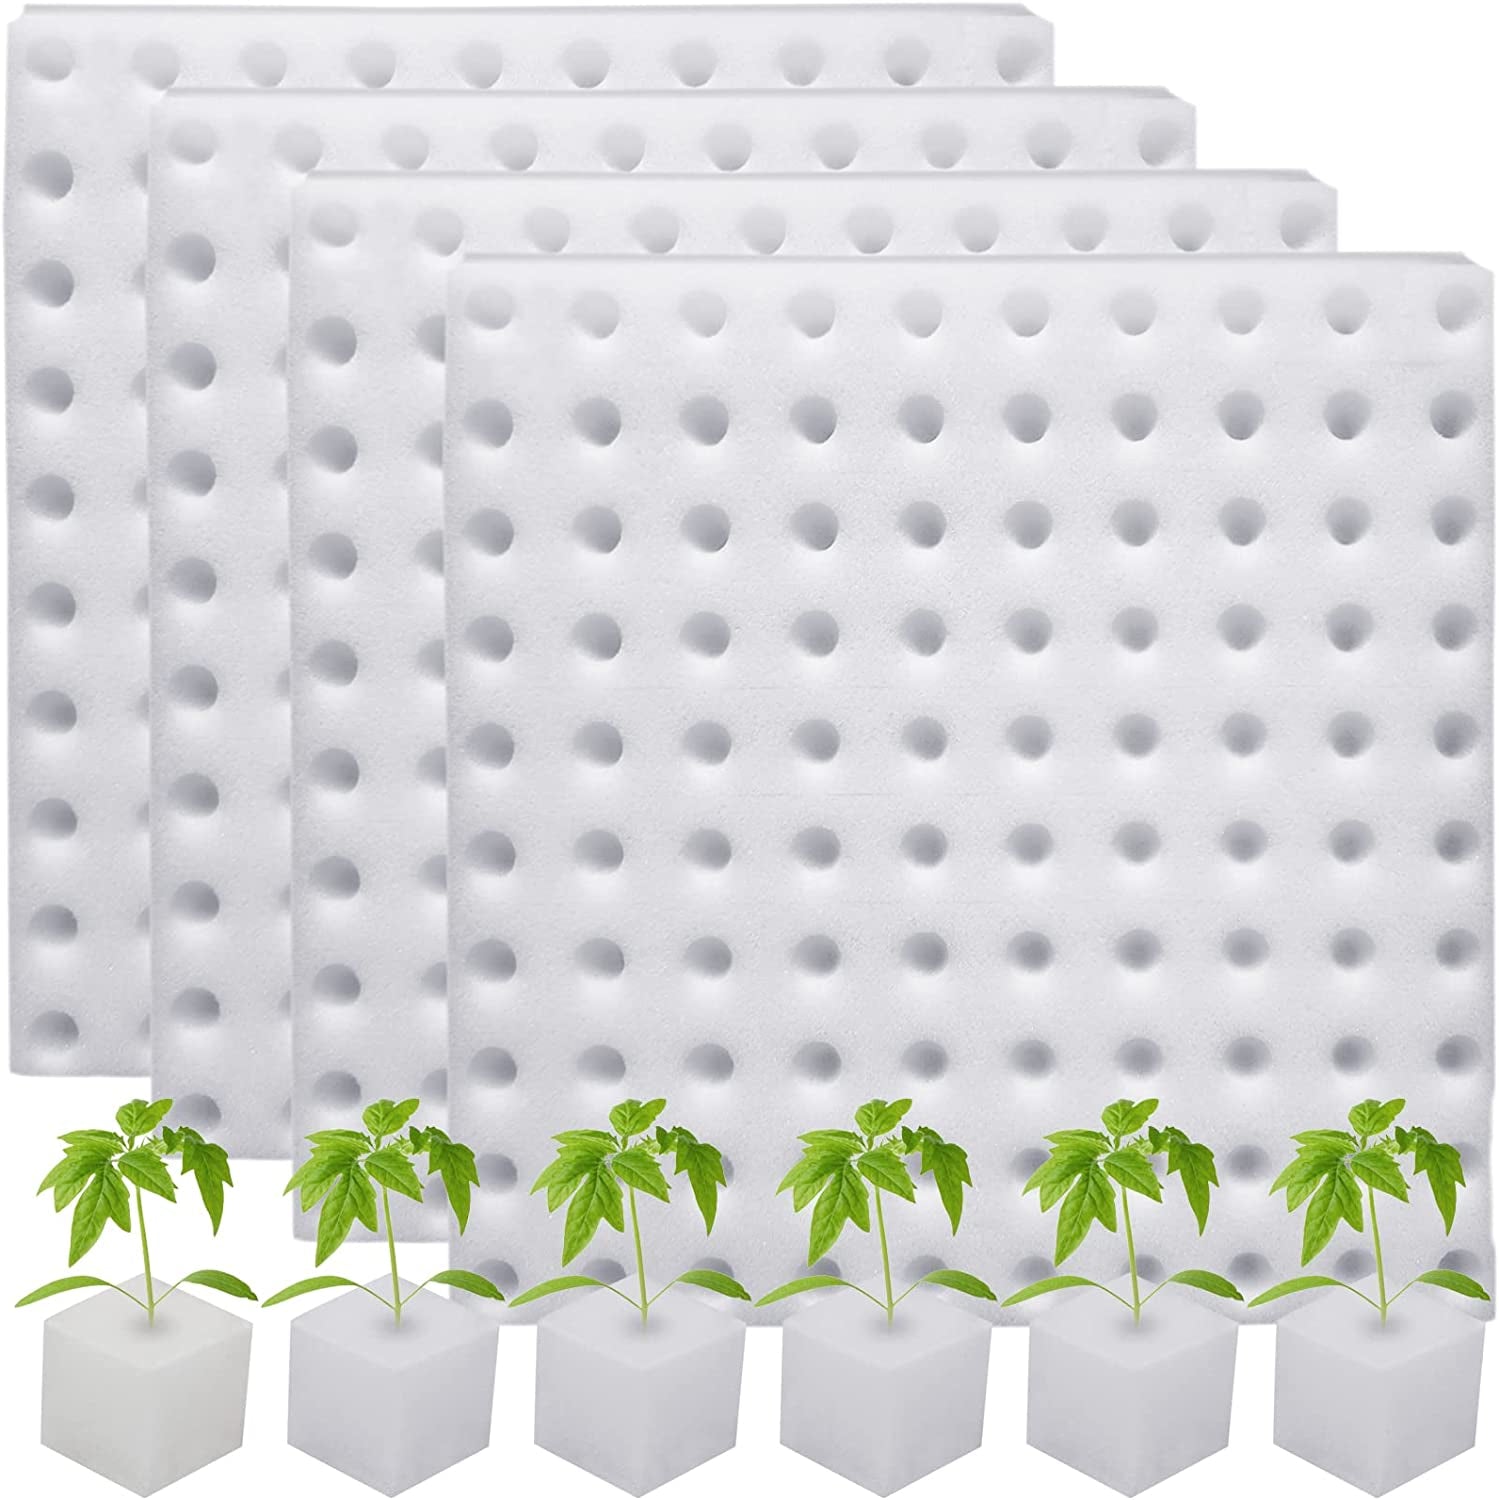 400 Pcs Hydroponic Sponges Planting Gardening Tool Soilless Cultivation Seedling Sponges Cultivation Sponge Greenhouse for Small Bud Growth & Grow Seedlings